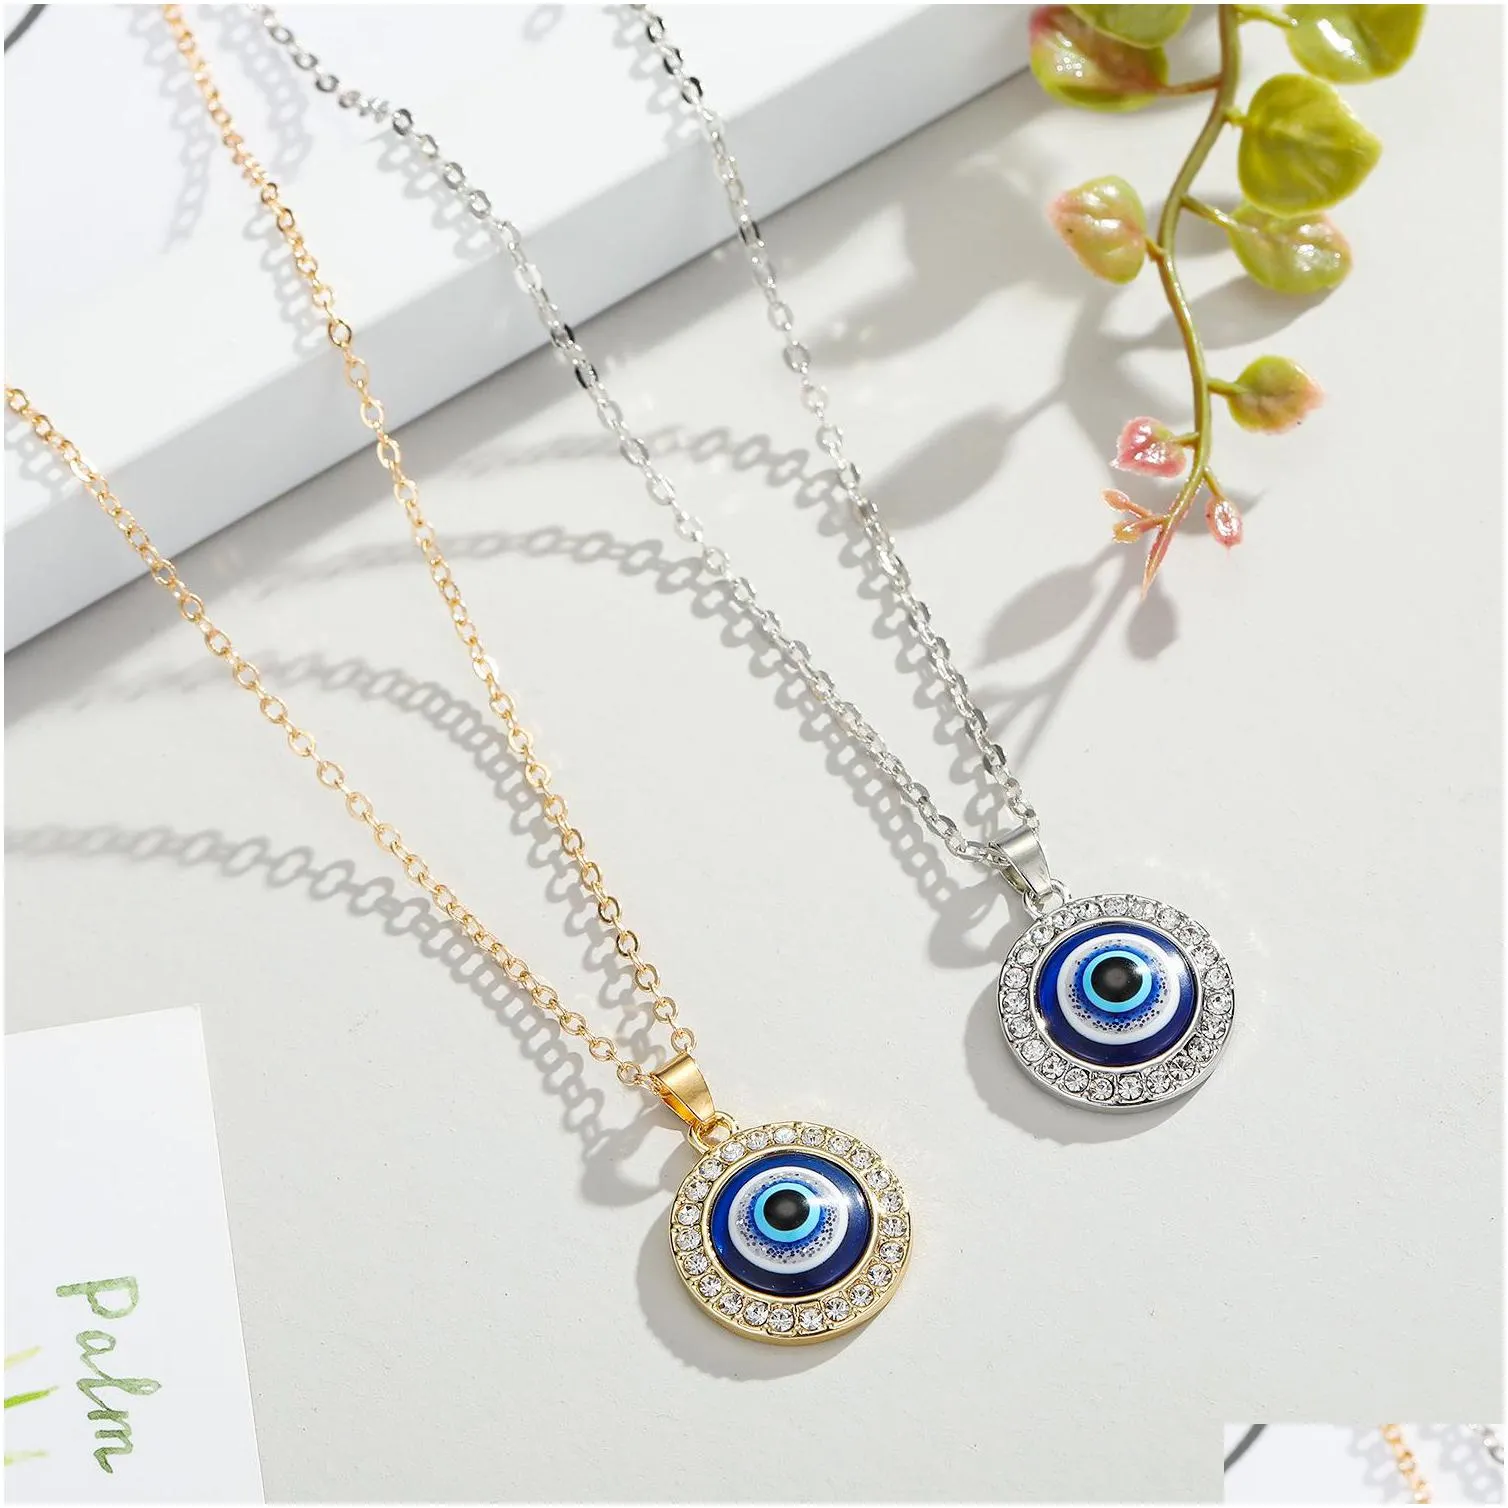 ups jewelry turkish eye necklace dot party favor diamond round blue eye pendant necklace foreign trade sweater chain jewelry